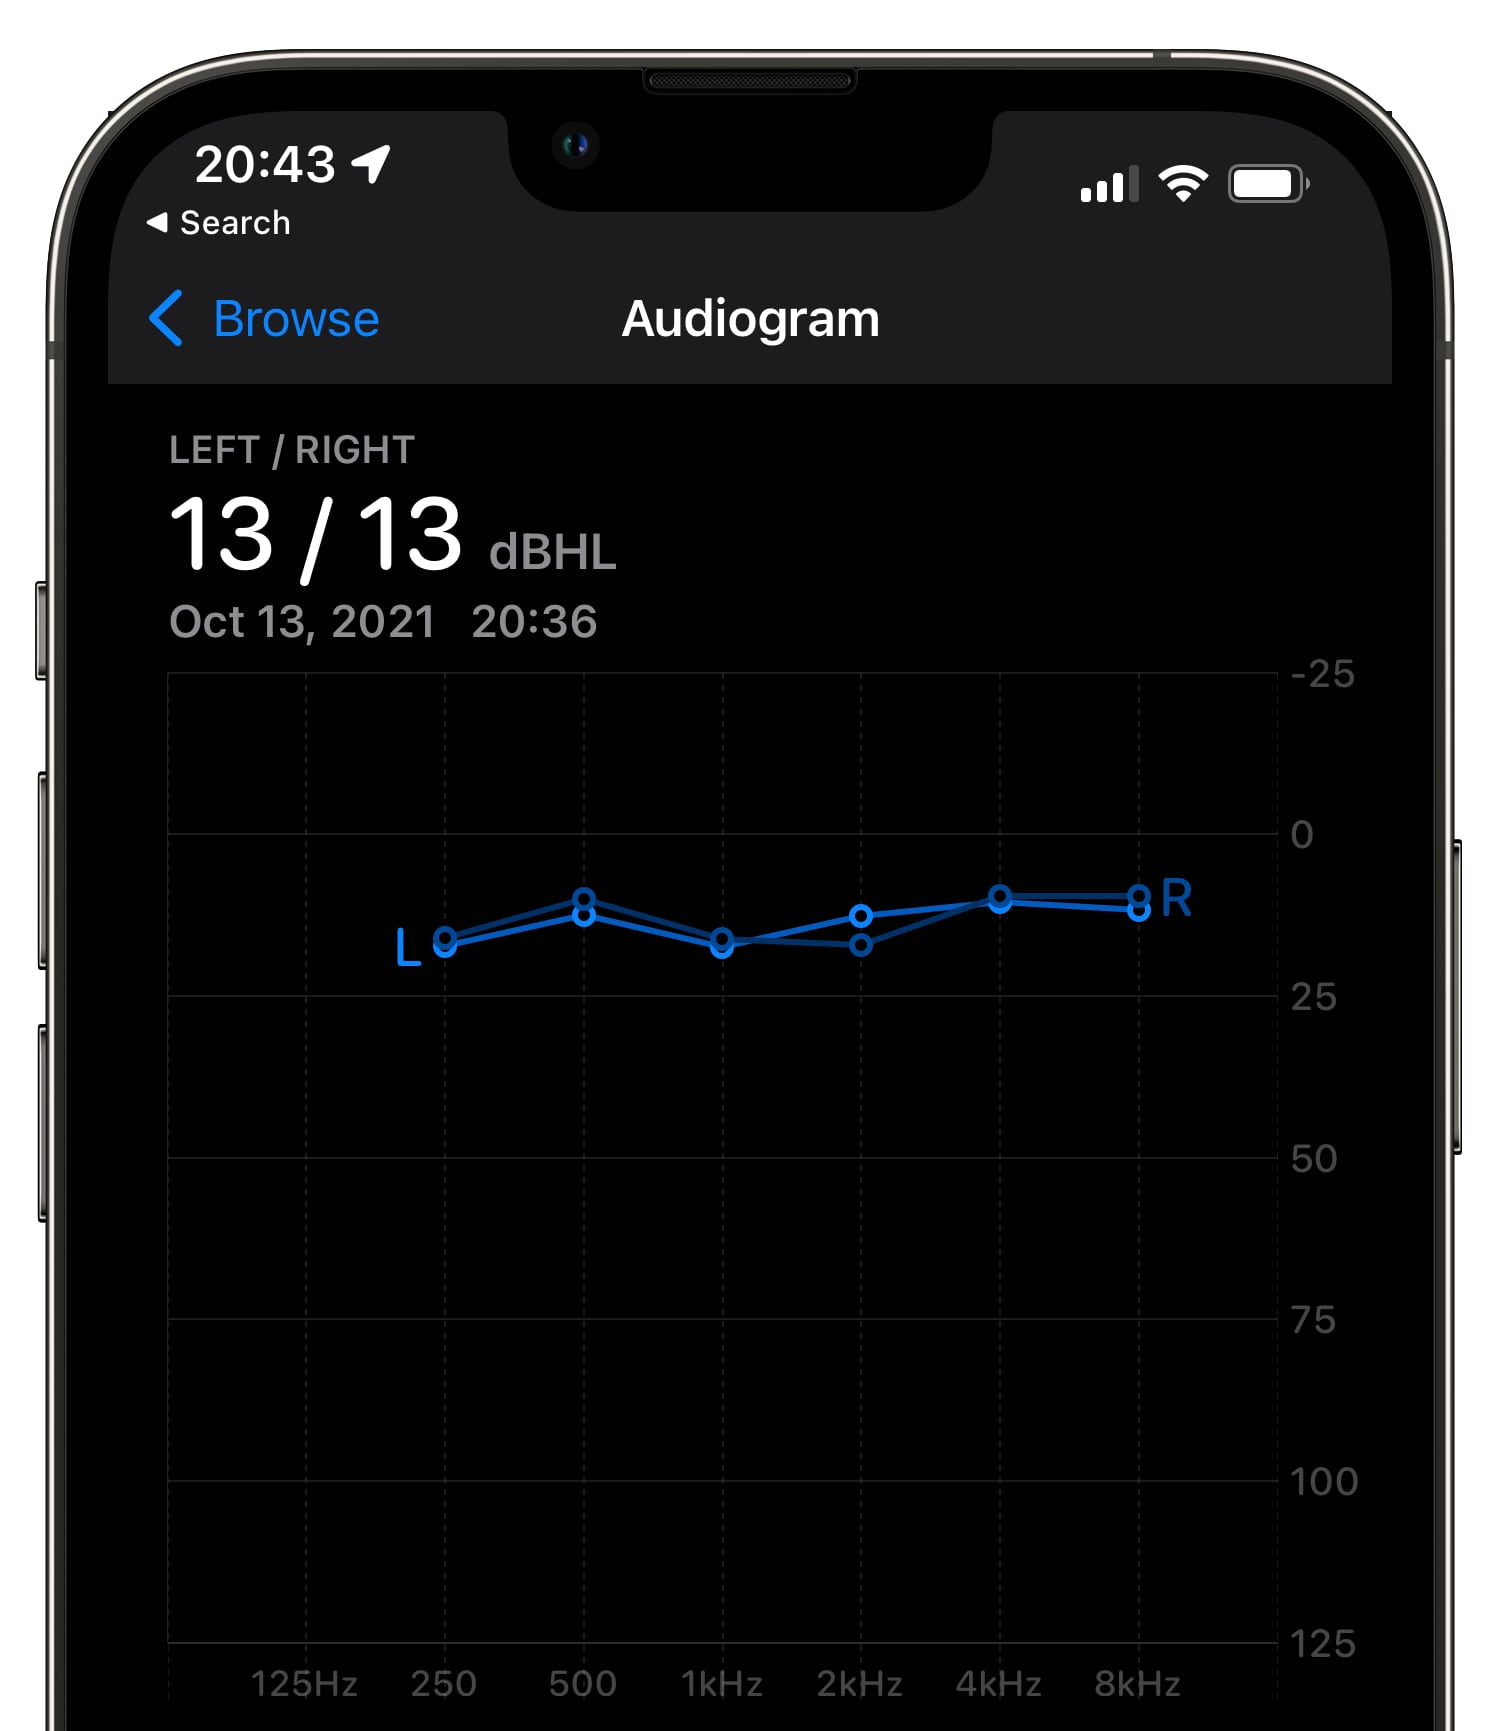 A screenshot of iOS 15's Health app on iPhone showing an audiogram